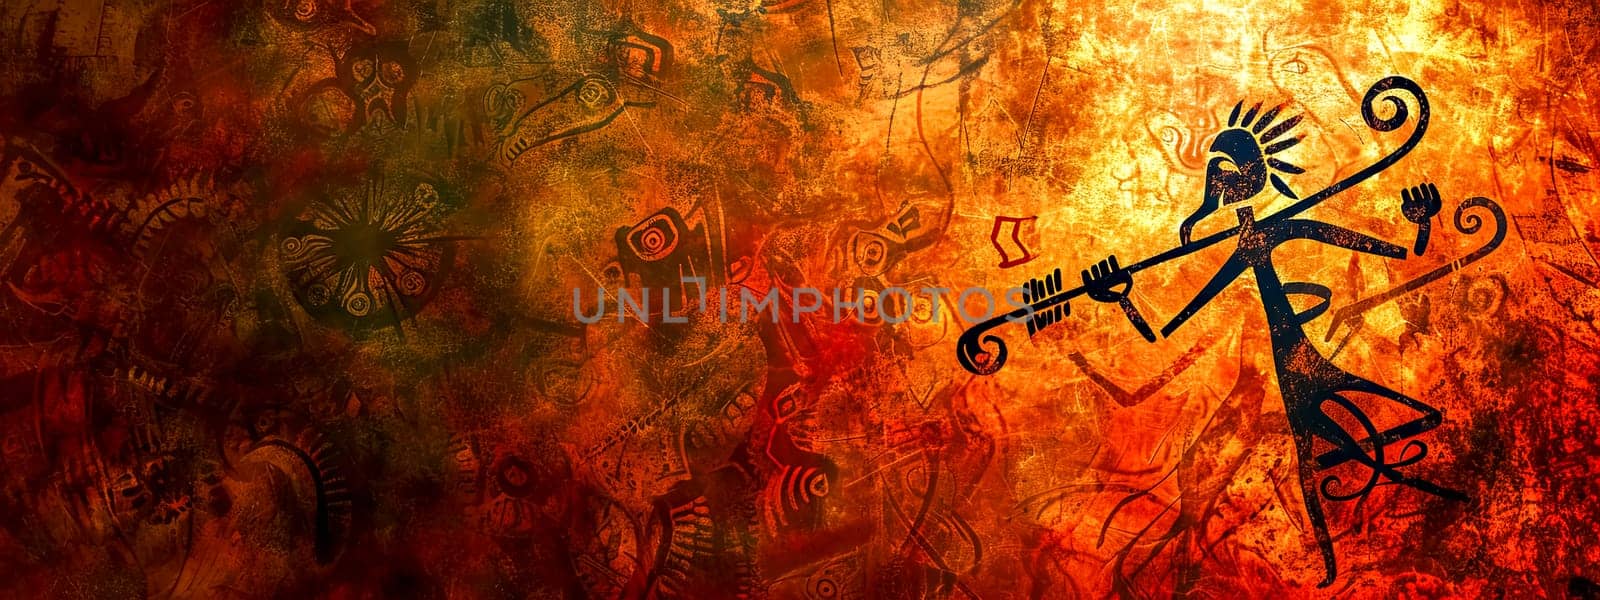 primitive style figures and symbols, reminiscent of ancient cave drawings, with a dominant figure appearing to play a musical instrument, all set against a fiery textured backdrop. copy space